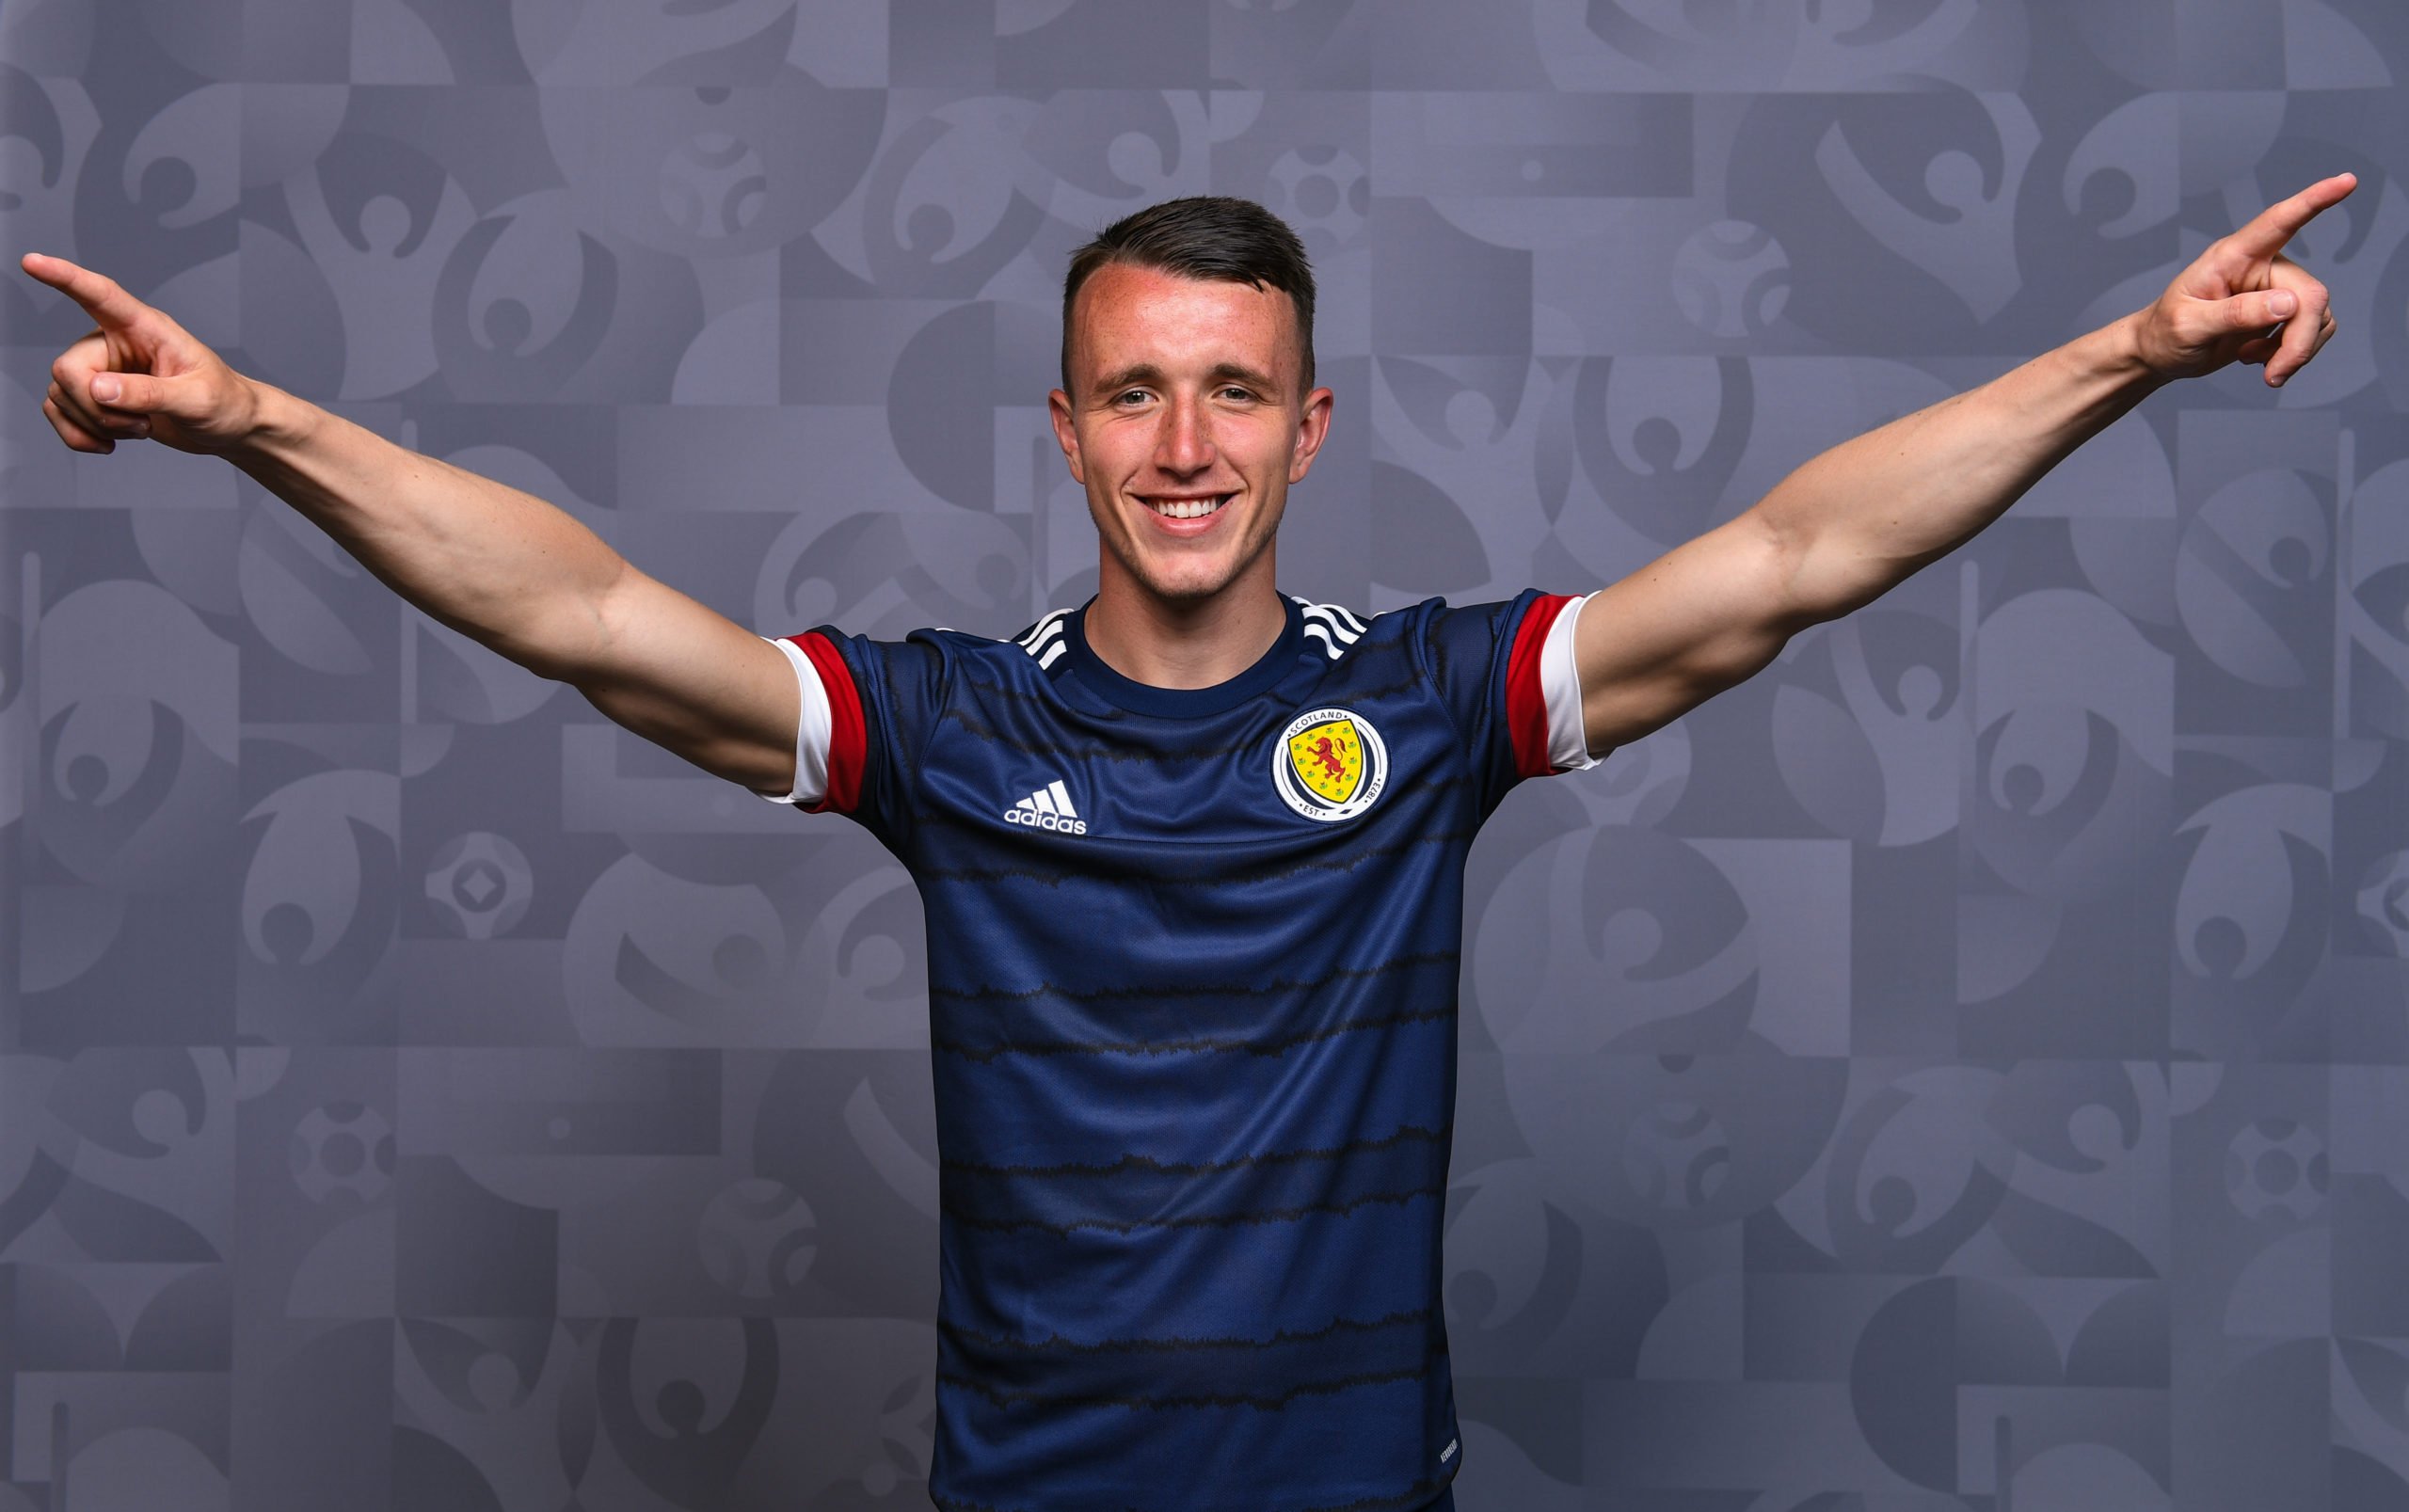 "Crazy"; Celtic POTY David Turnbull details his unusual rise to Scotland duty